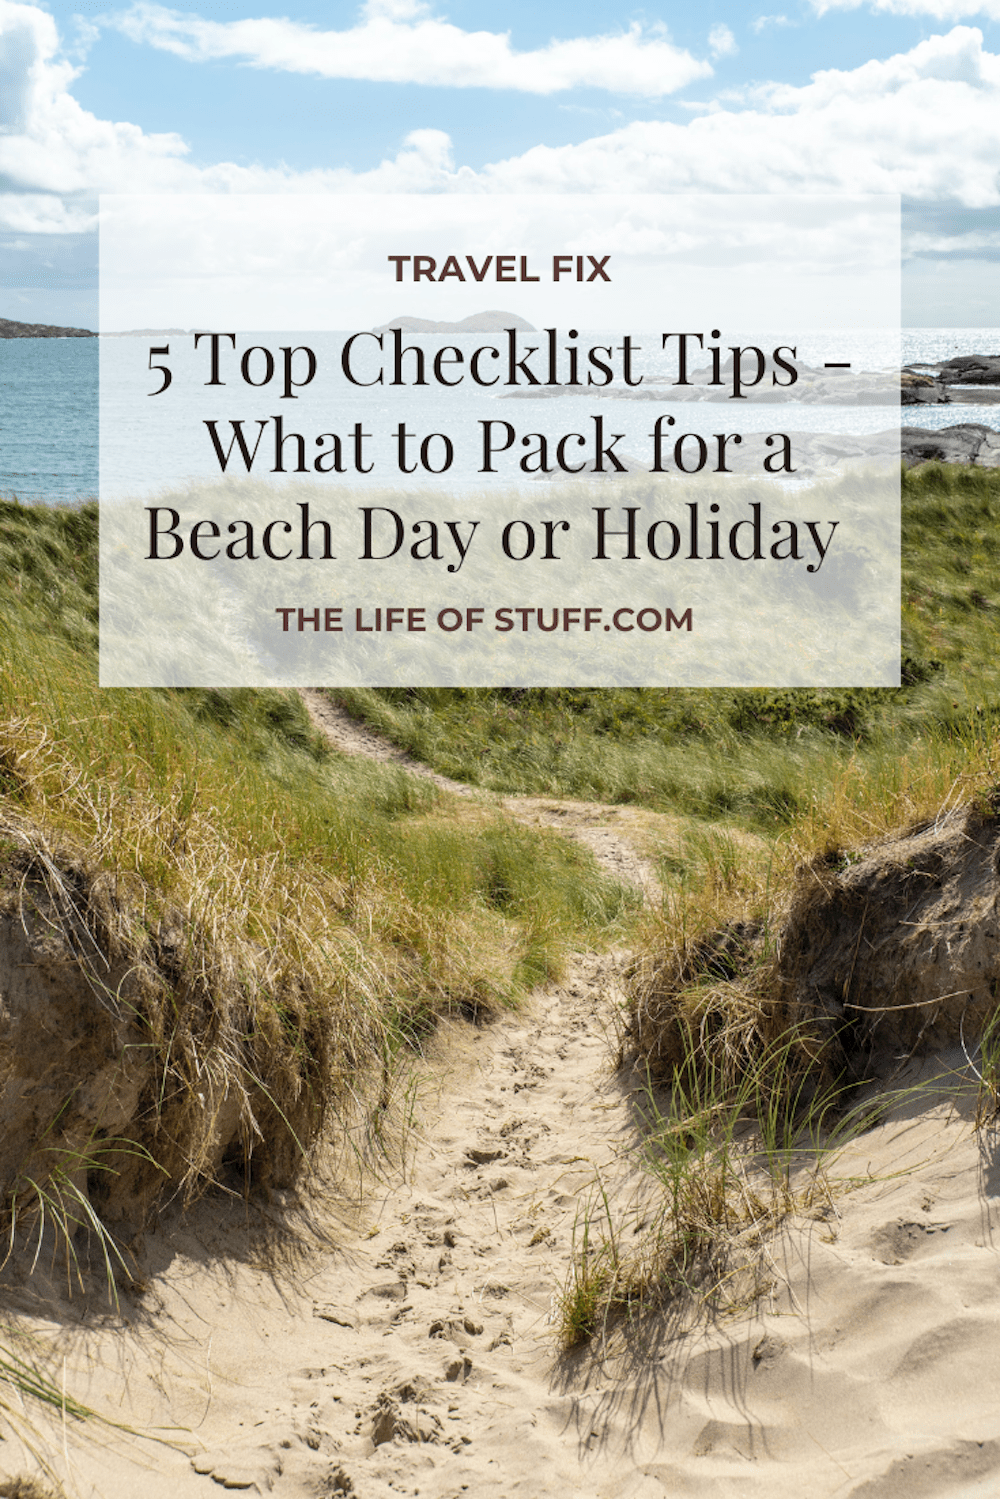 5 Top Checklist Tips - What to Pack for a Beach Day or Holiday - The Life of Stuff